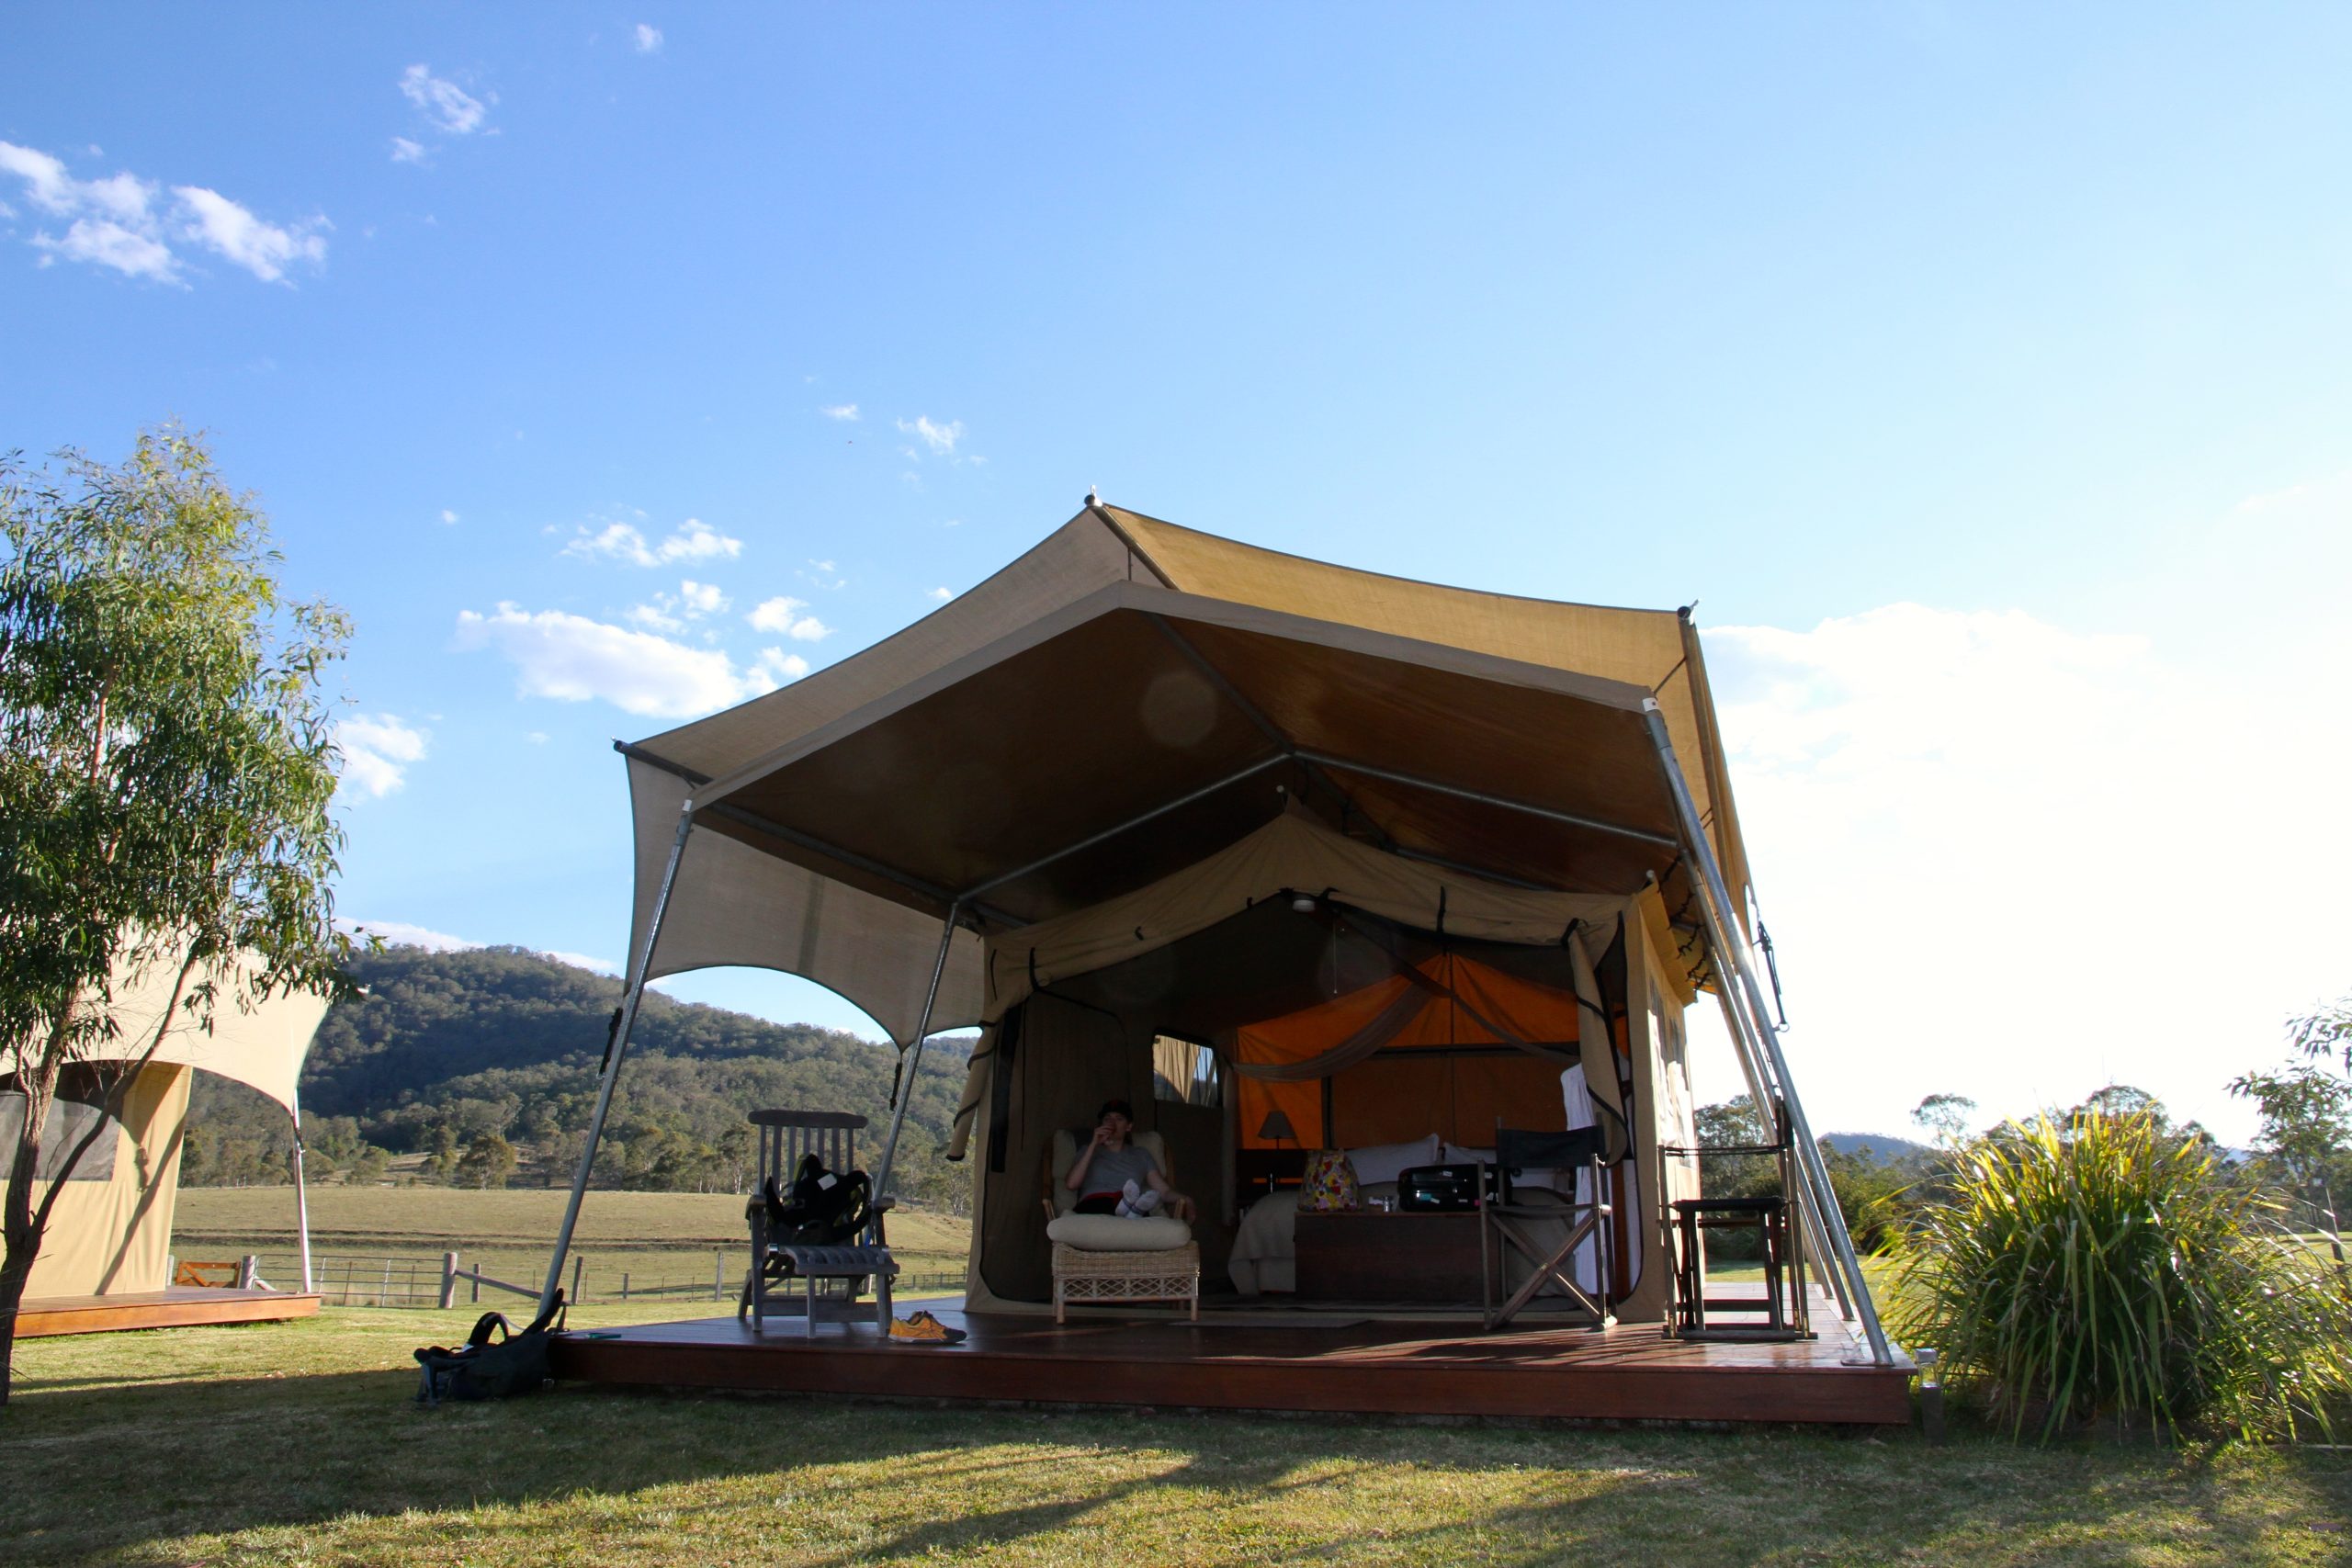 Spicers Canopy tents